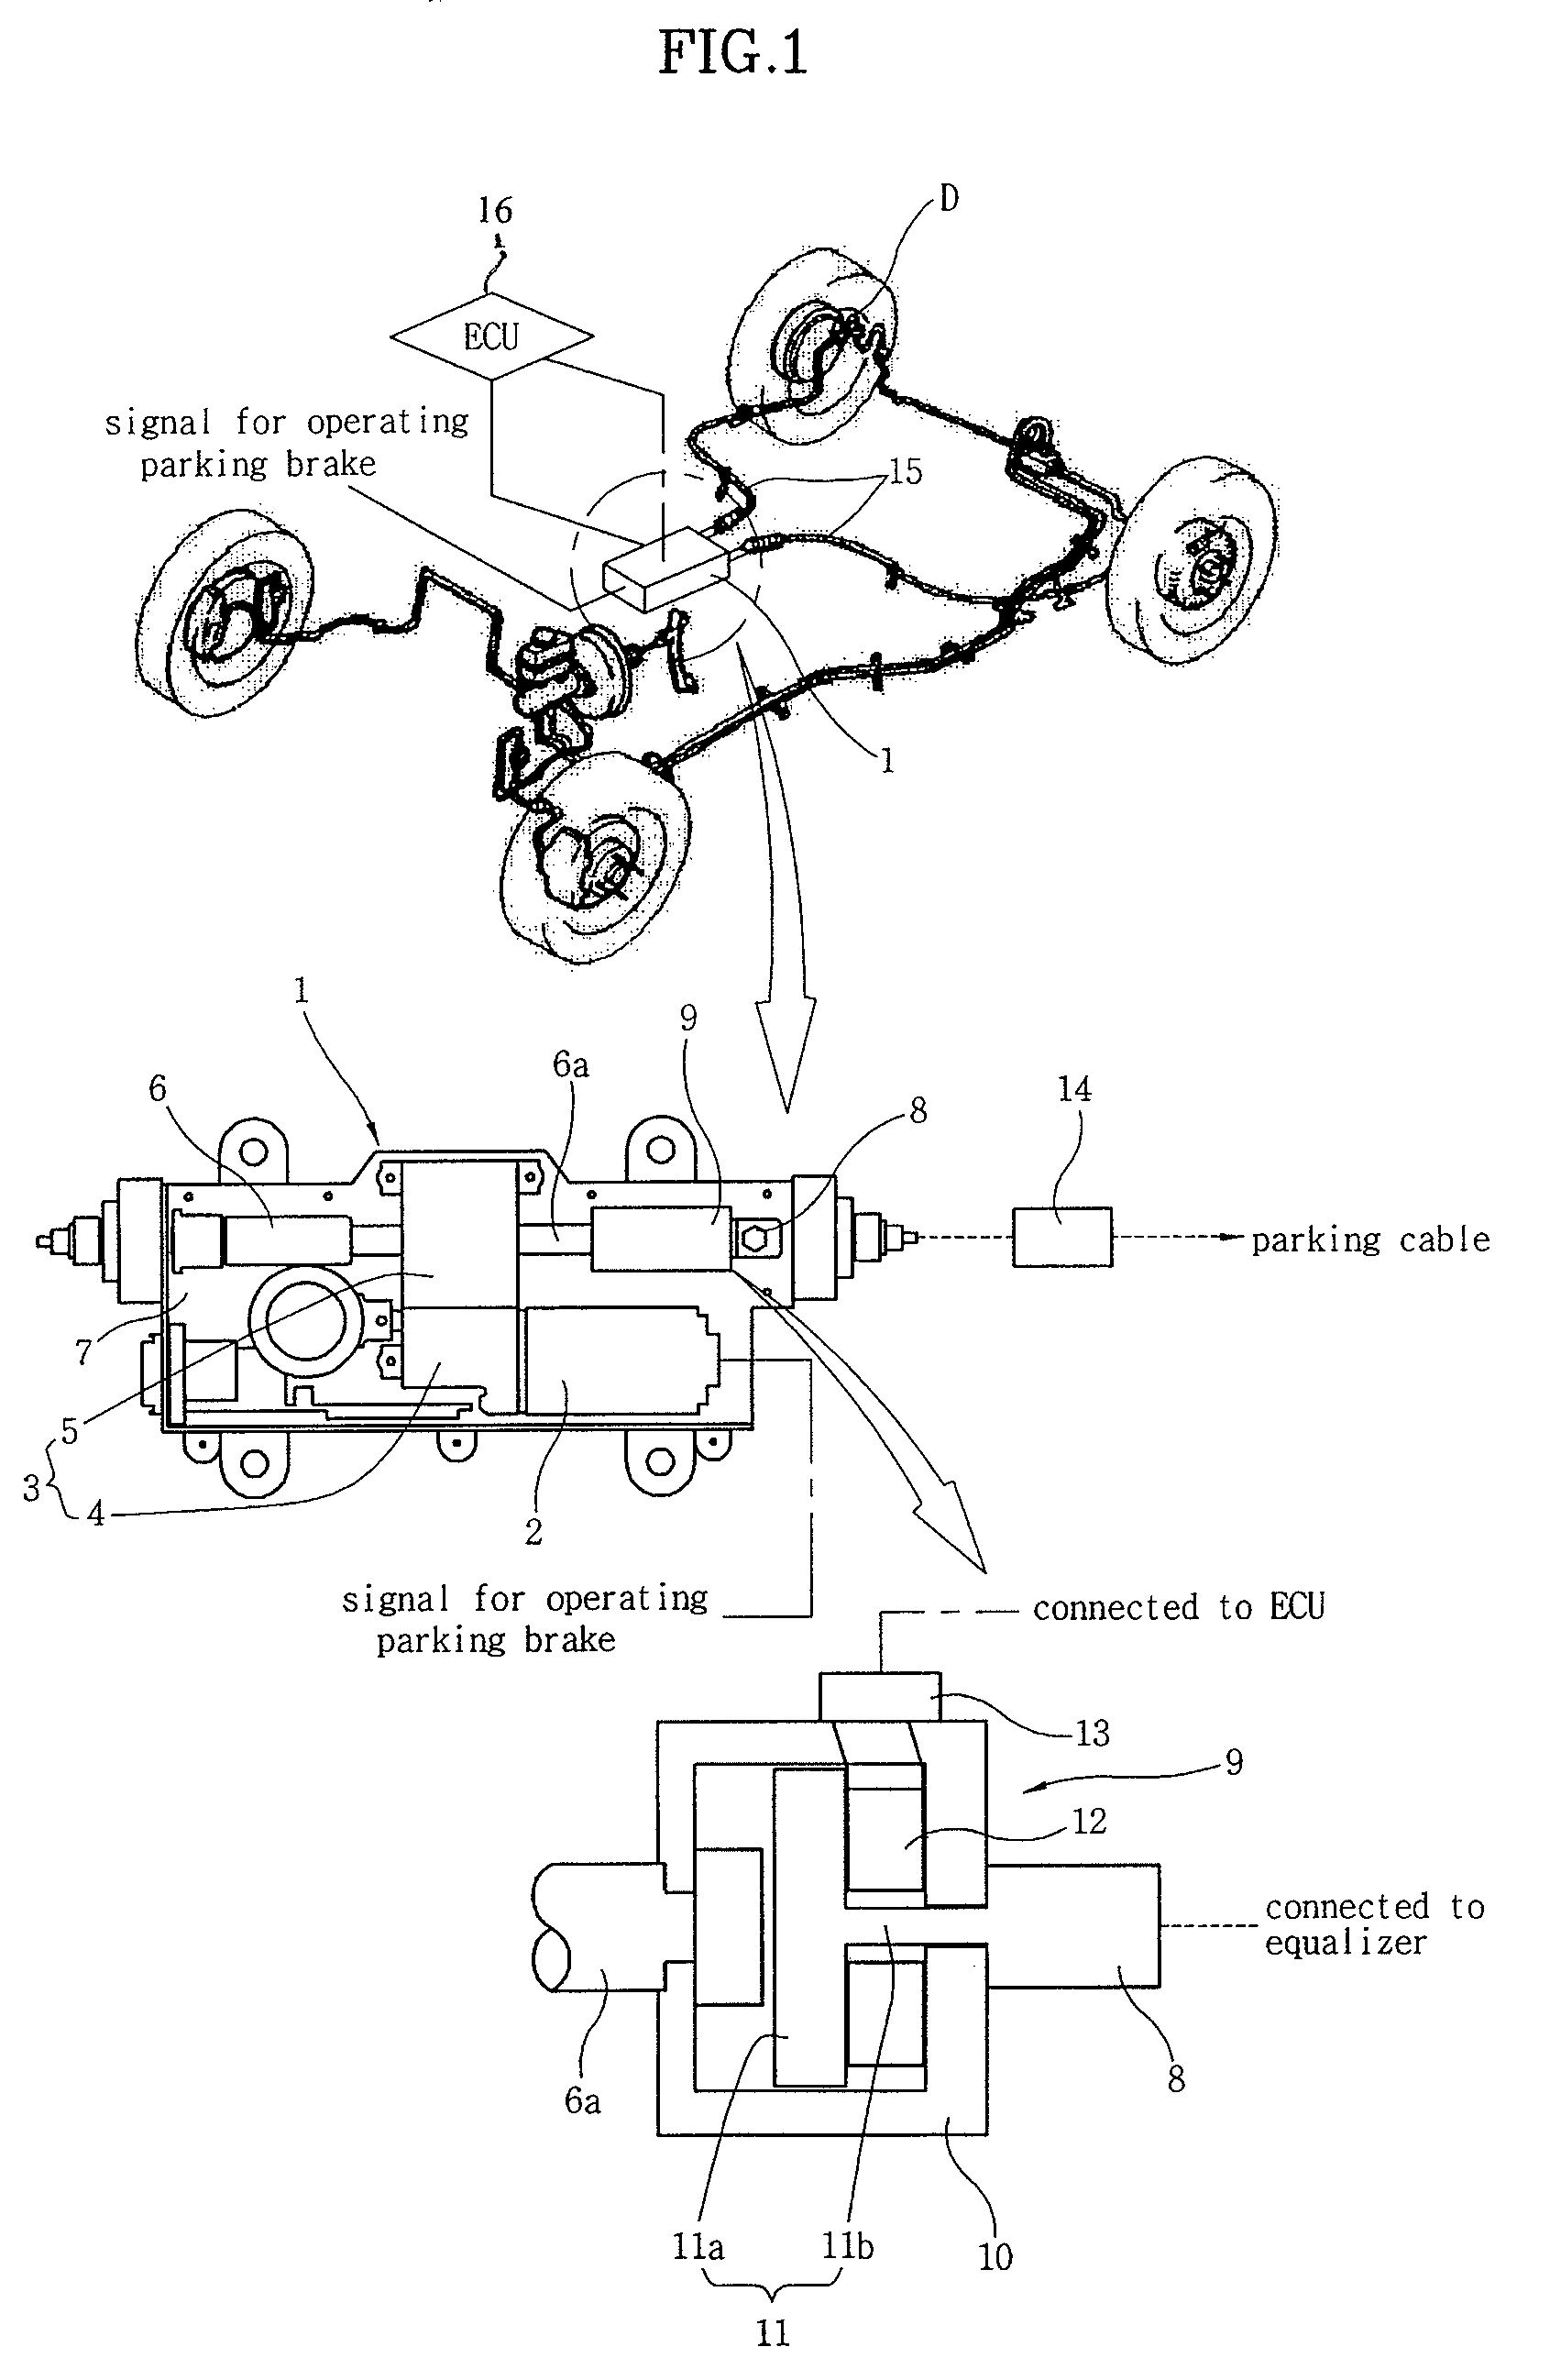 Electric parking brake for vehicles having operating load measuring device